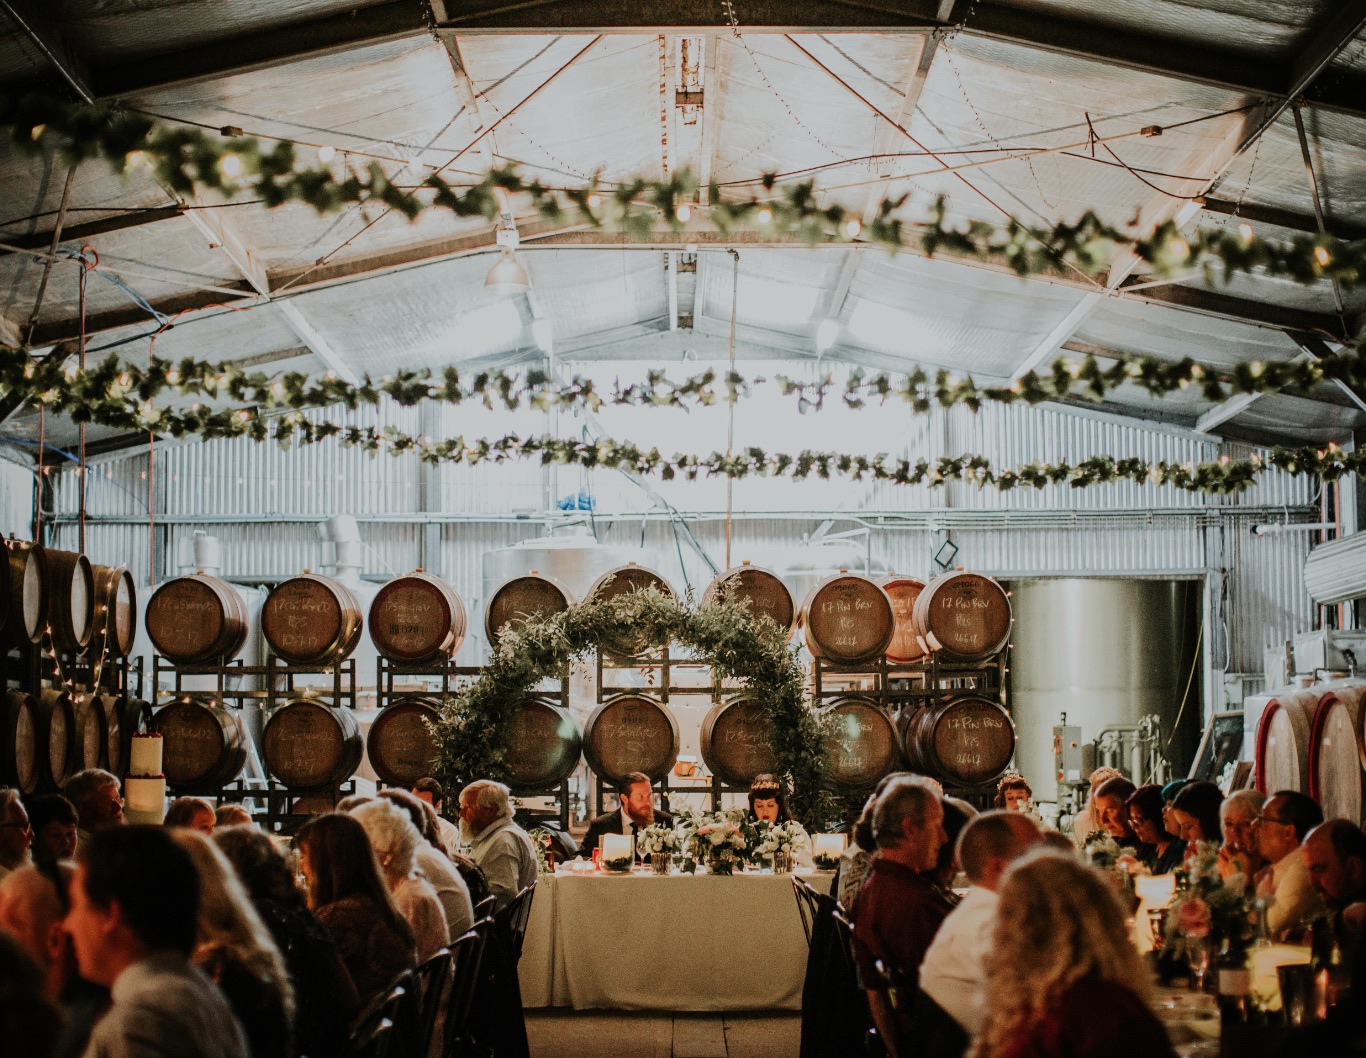 Couple sitting at wedding party table, with wine barrel racks behind them.